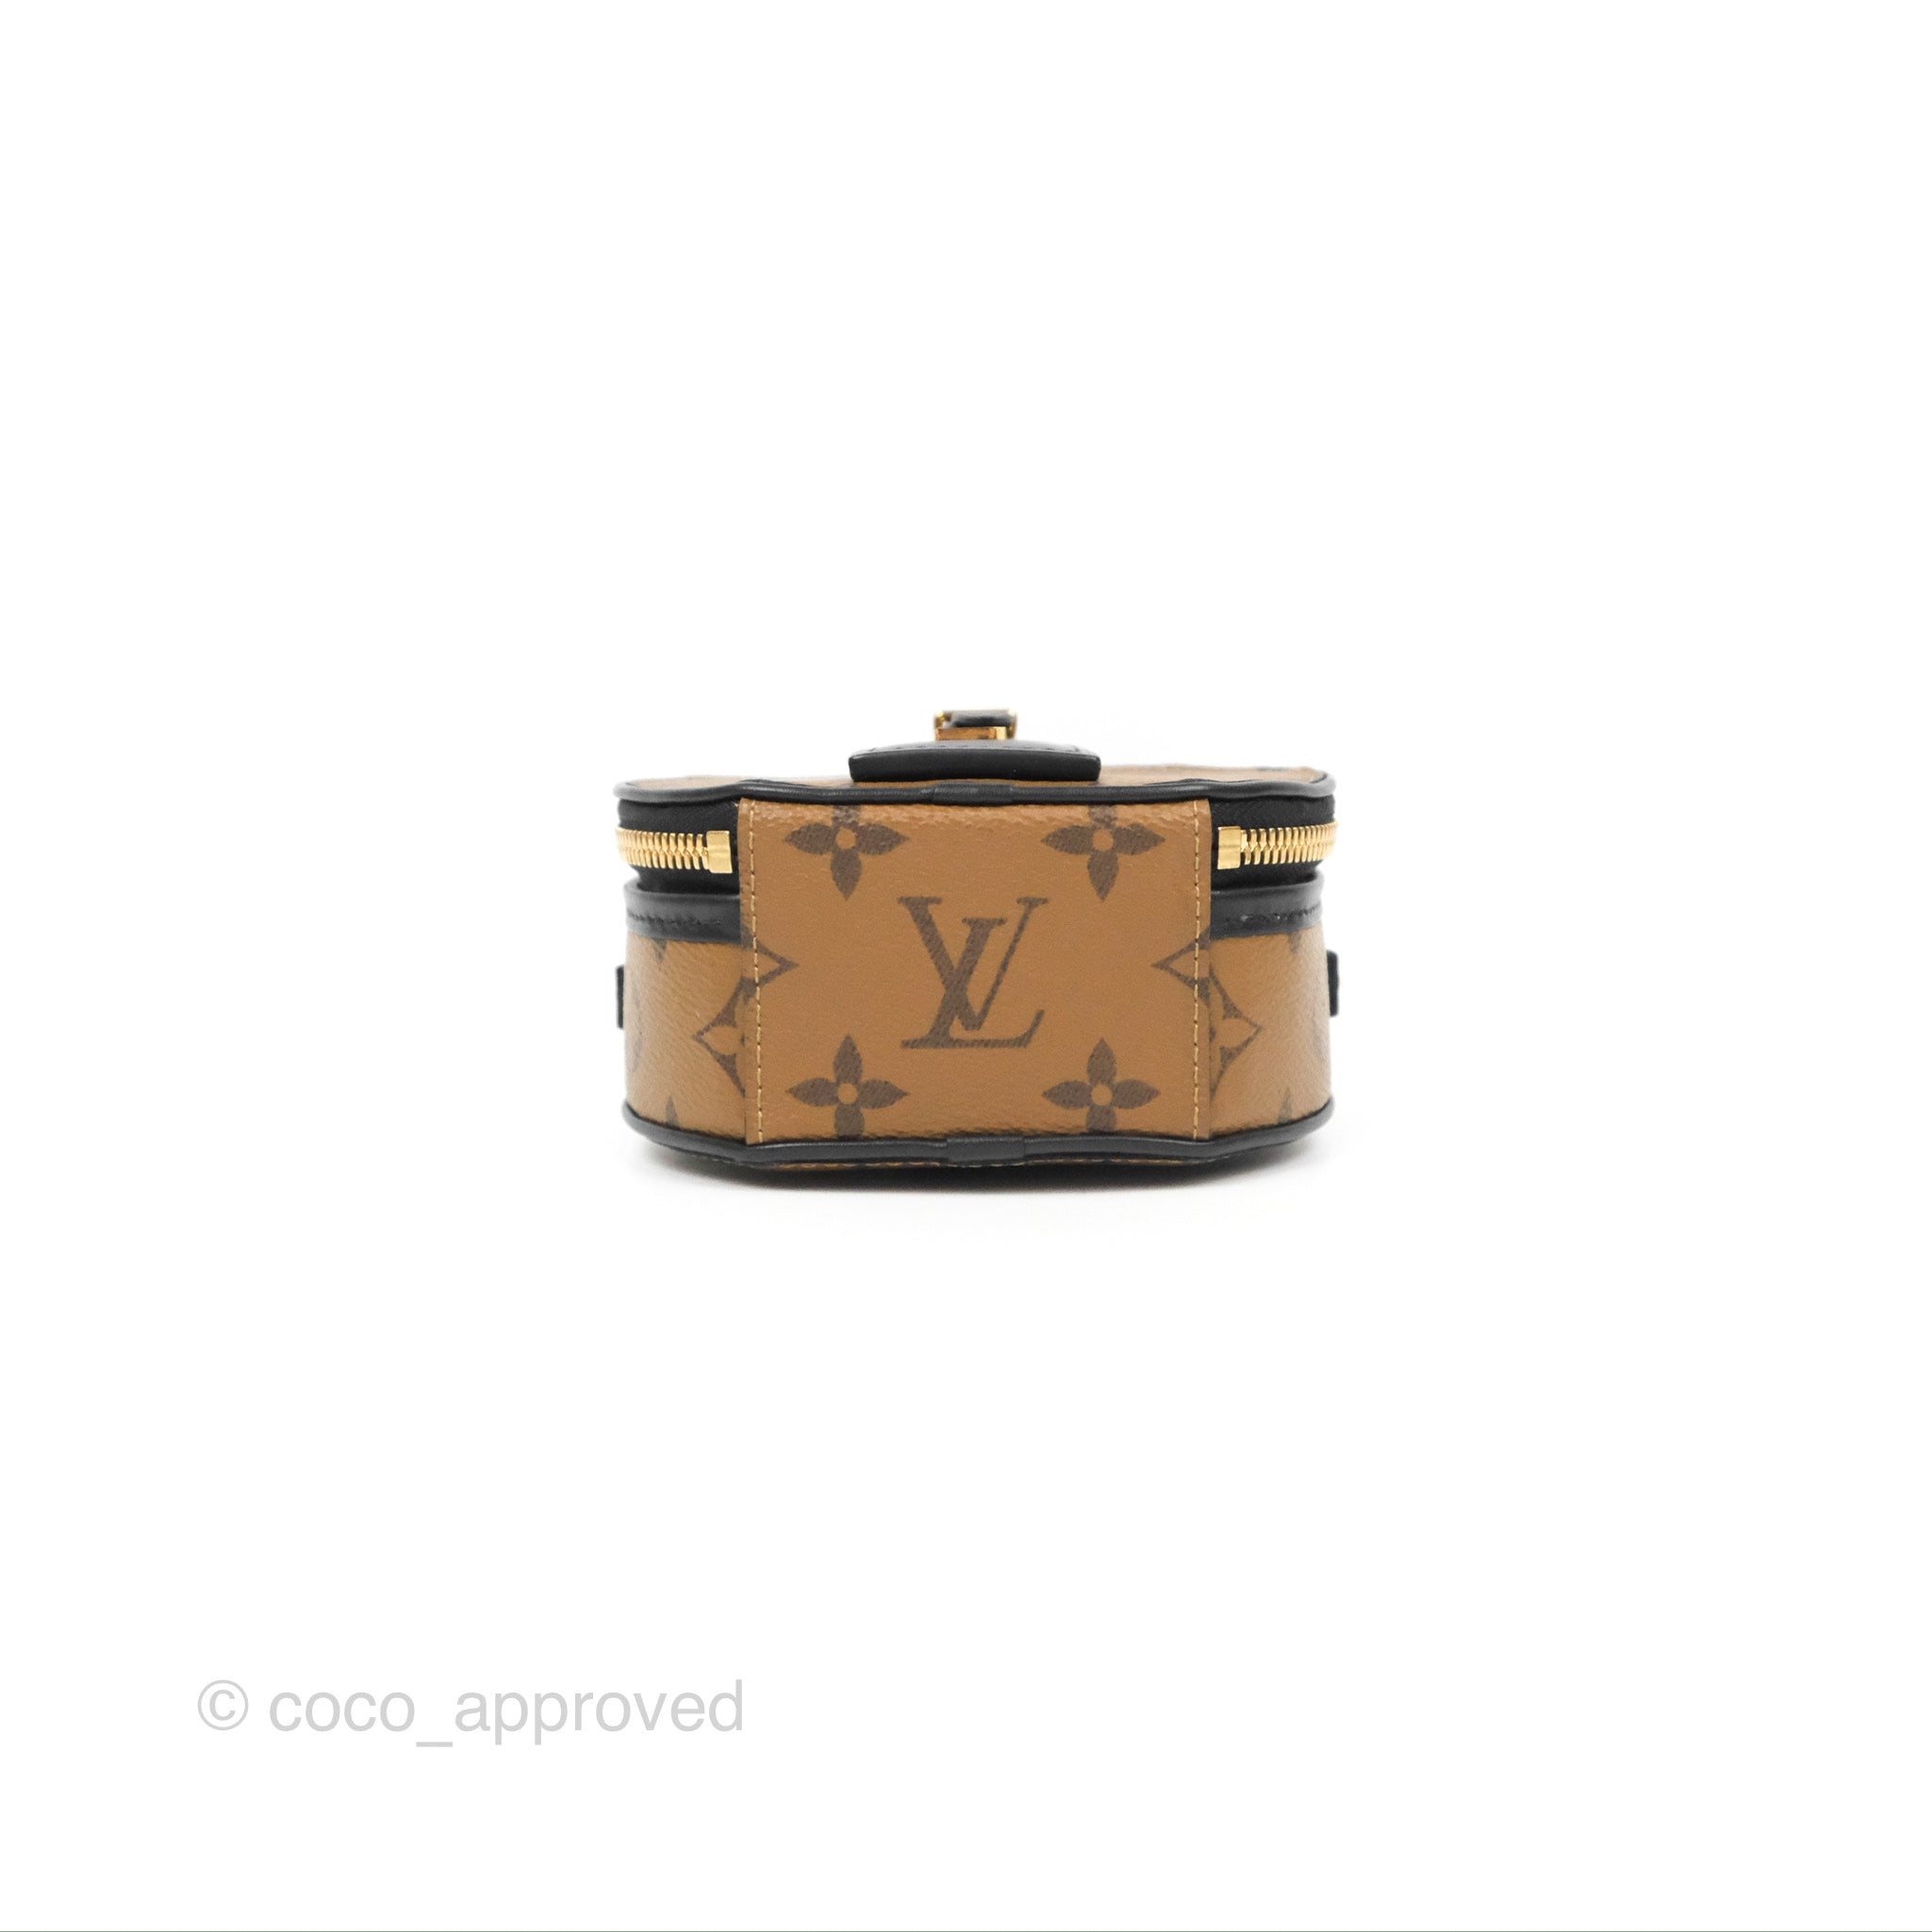 Louis Vuitton Tan Monogram Leather Side Trunk (Sold Out) Auction